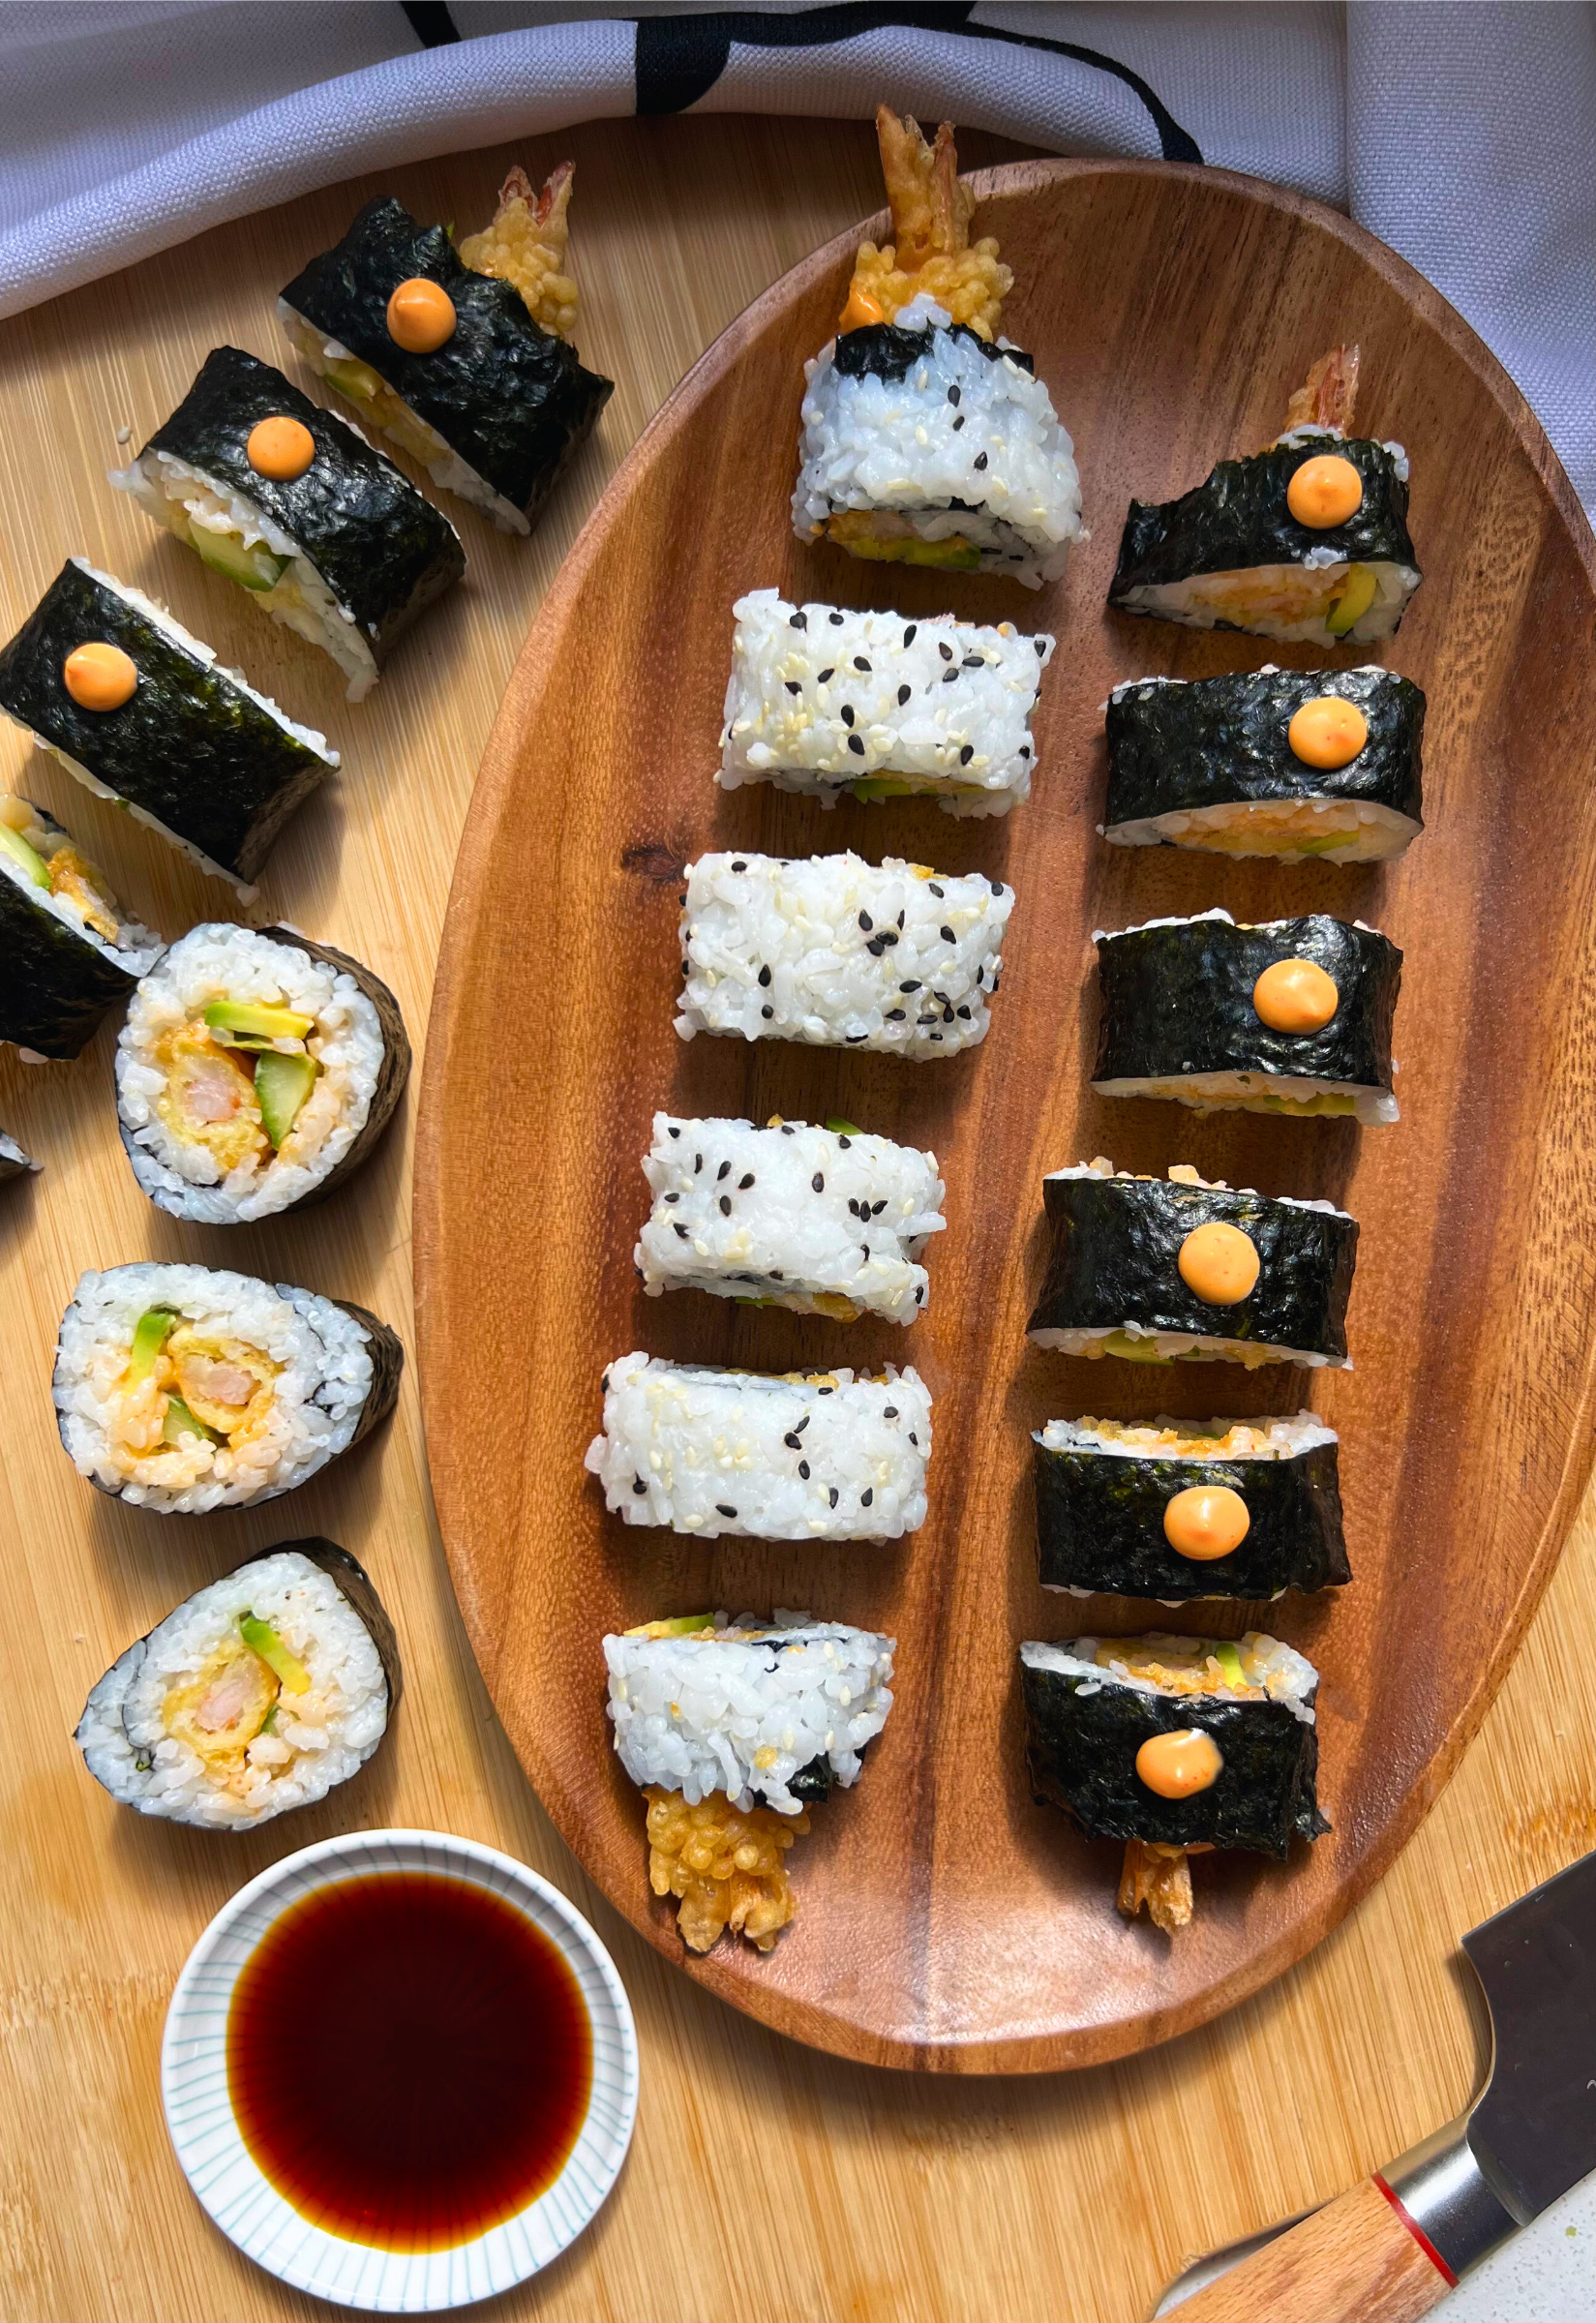 Homemade Sushi Recipe • Oh Snap! Let's Eat!